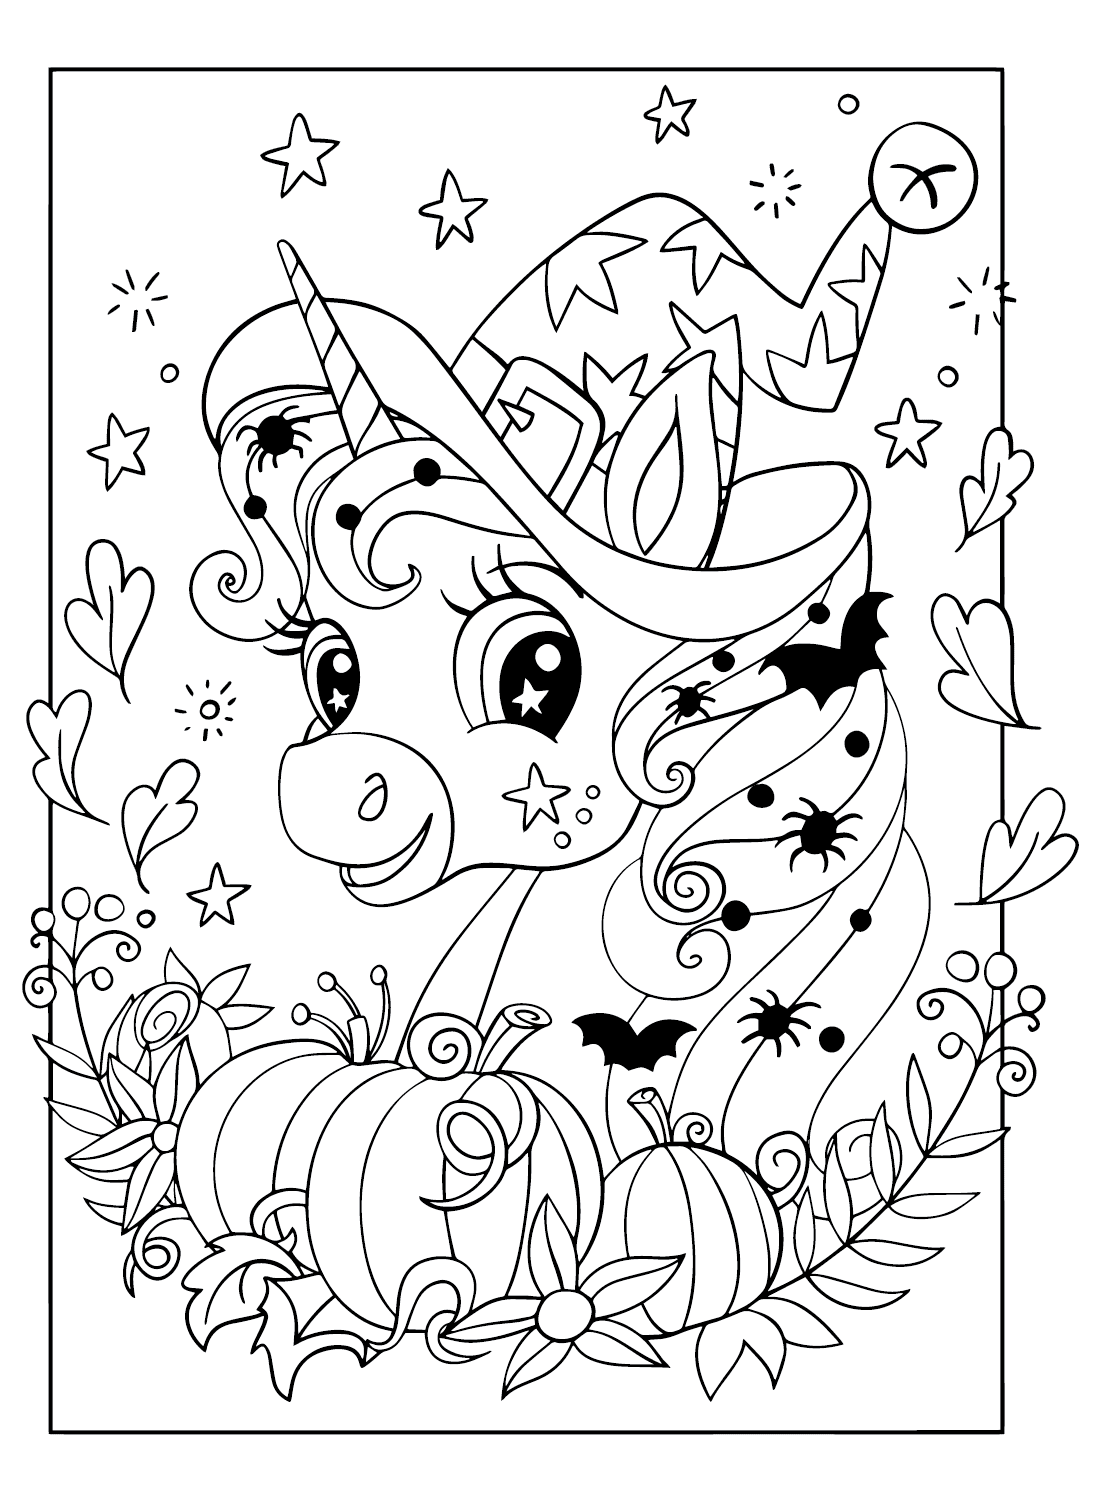 Halloween Unicorn Coloring Pages to Download